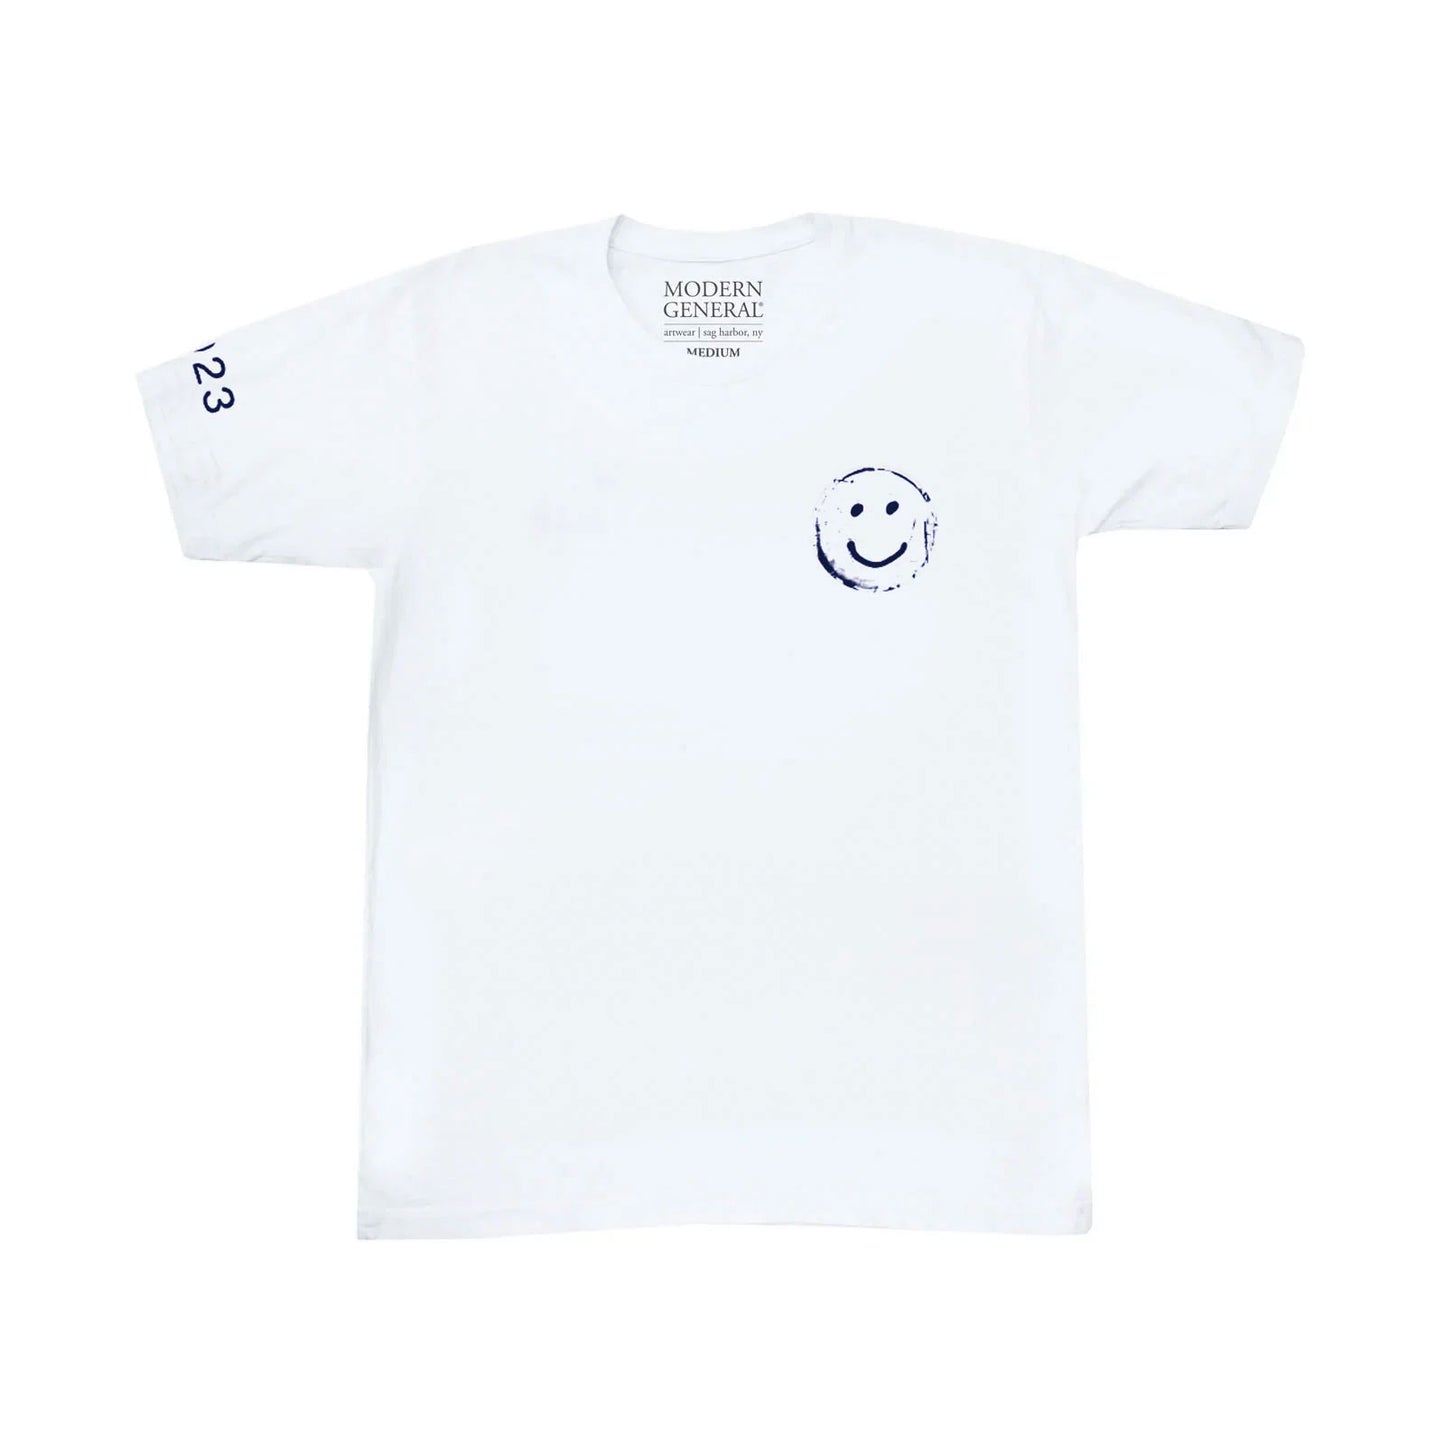 Modern General® Artwear Local 2023 T-Shirt in White with Navy